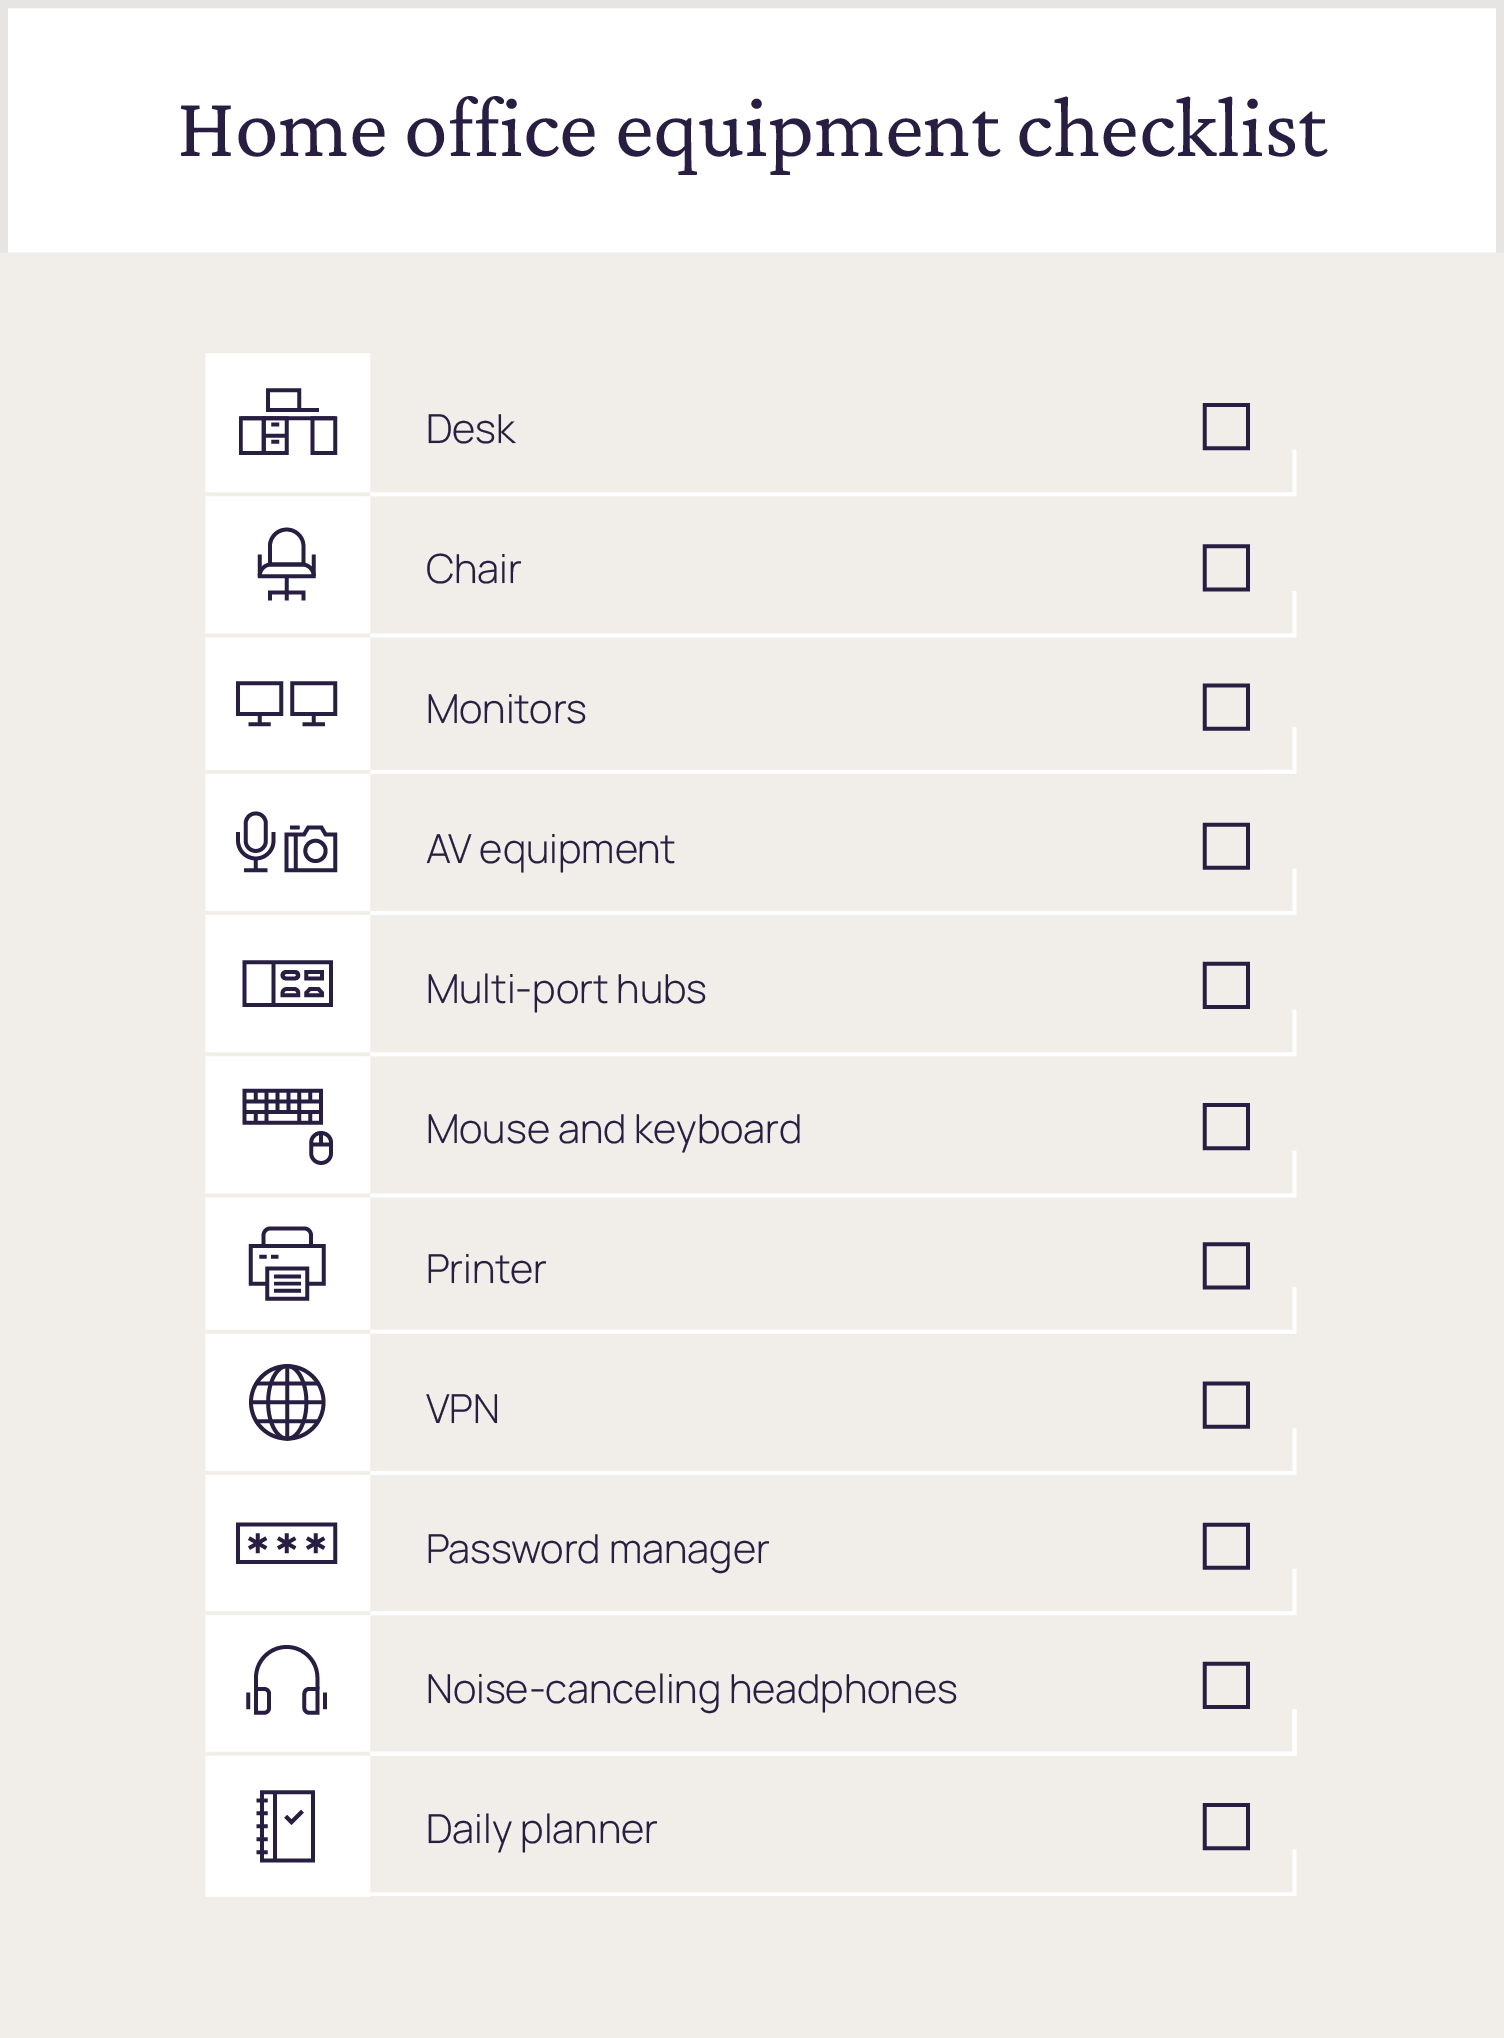 https://images.ctfassets.net/n2ifzifcqscw/6OoLgS9gftQIb2kNxRyRby/3e45df3e8f8b1eb81a927b147885fe8e/home-office-checklist.png